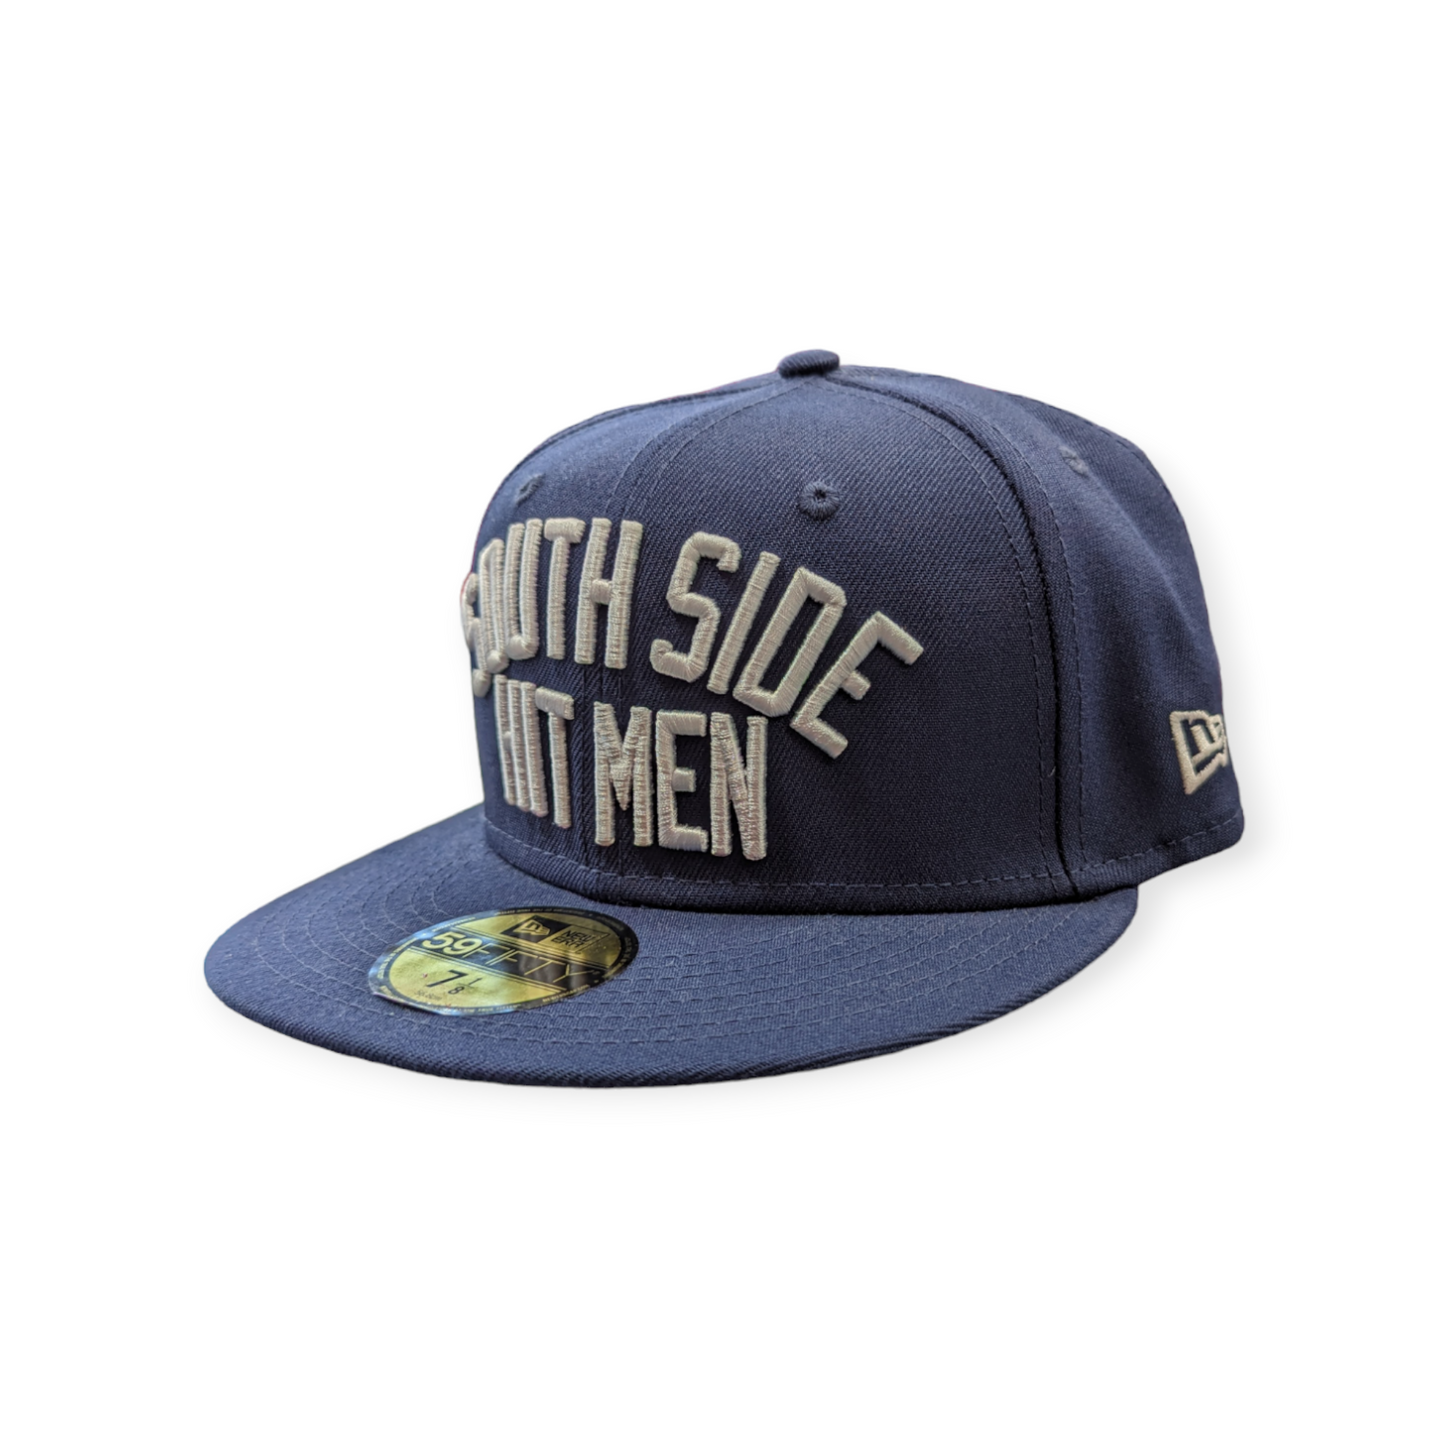 Chicago White Sox New Era Navy South Side Hitmen 59FIFTY Fitted Hat